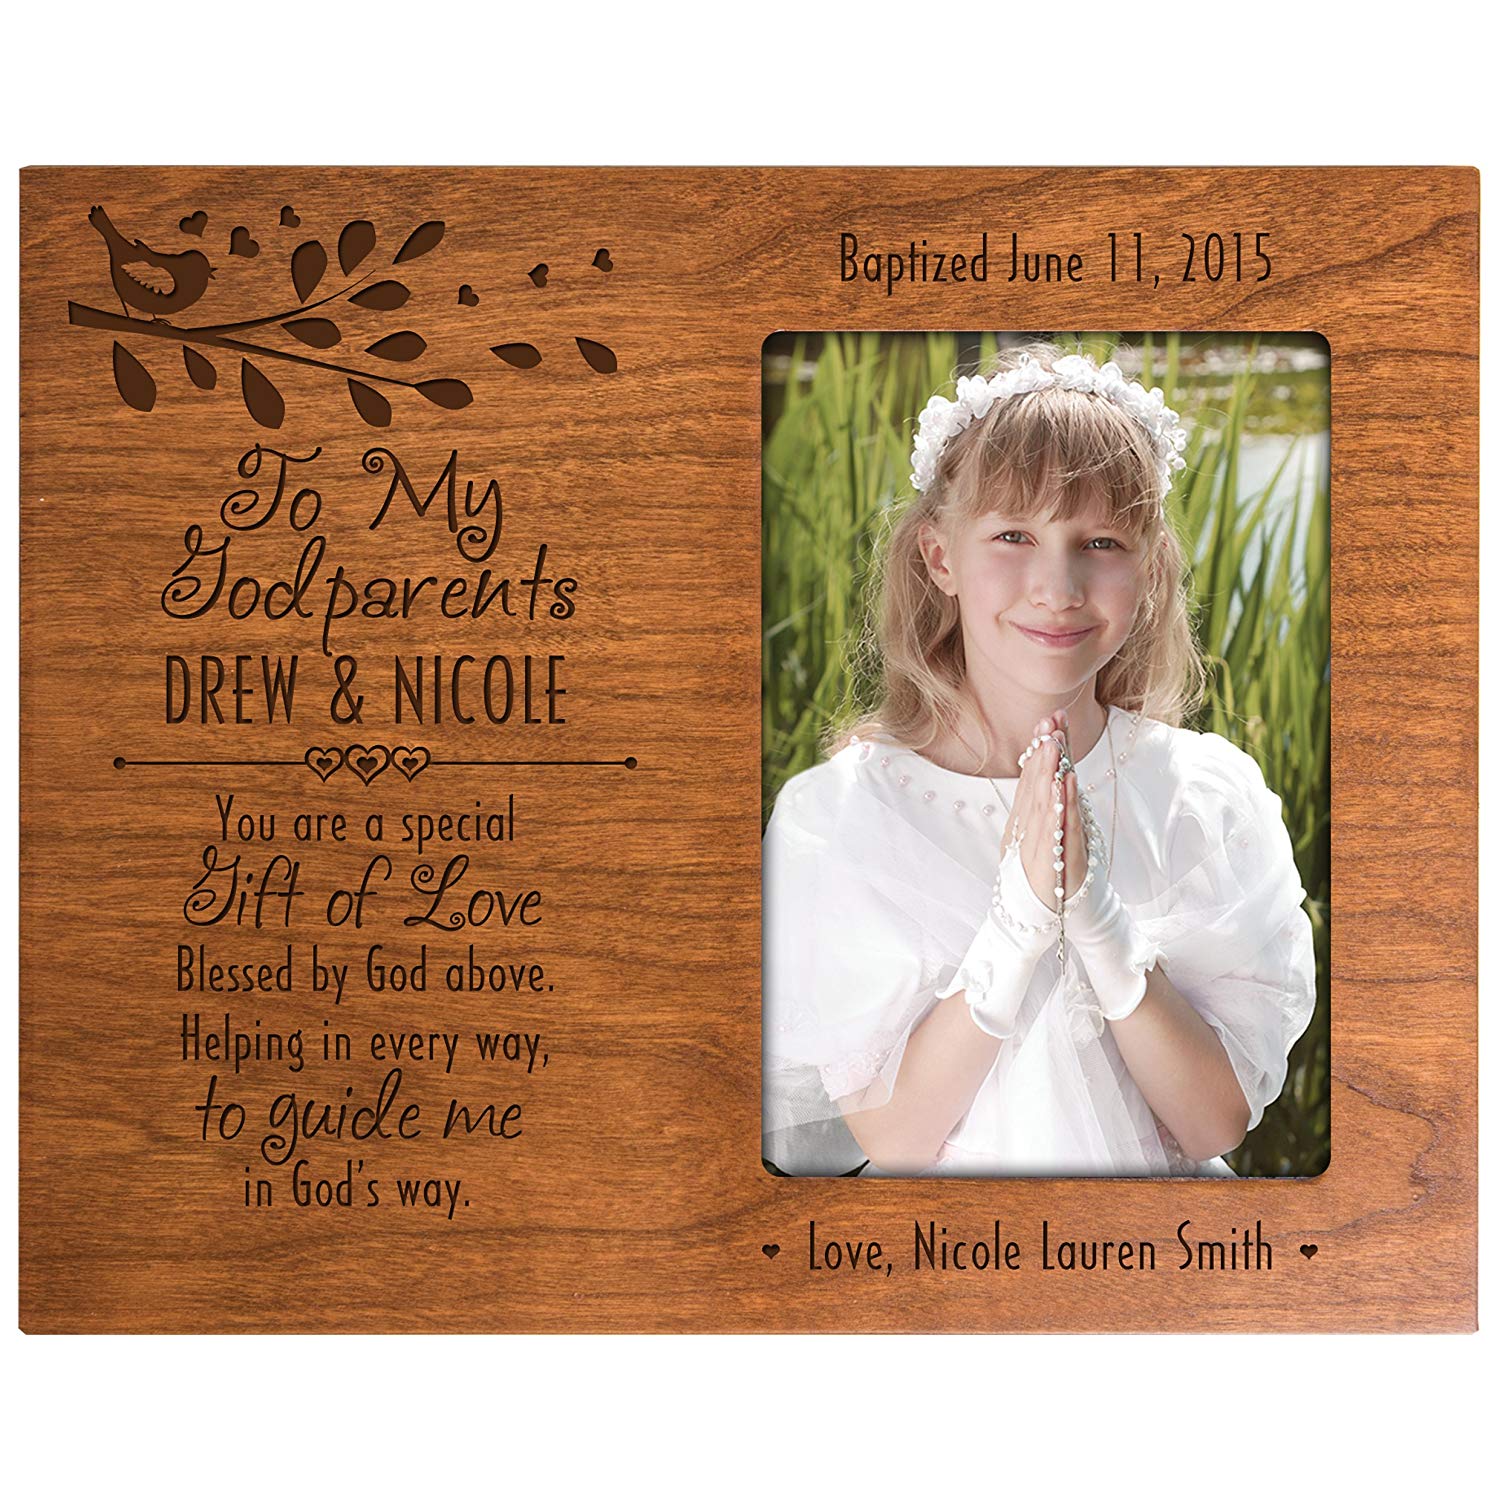 Personalized Baptism Photo Frame Gift "Gift of Love" - LifeSong Milestones